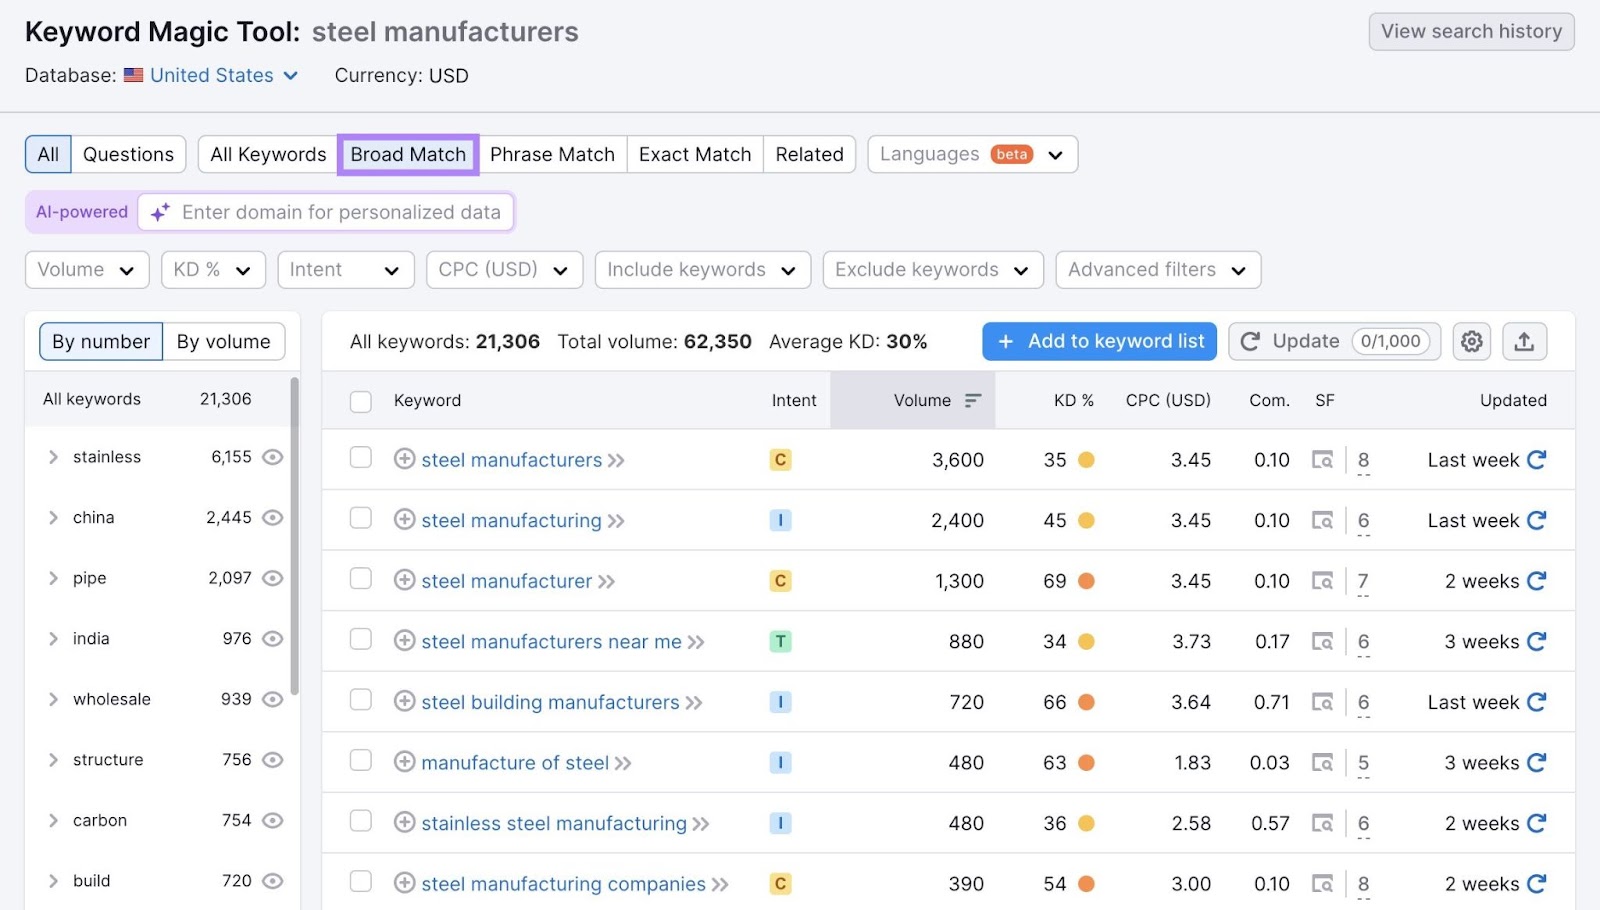 "Broad Match" keyword suggestions on the Keyword Magic Tool for the term "steel manufacturers."